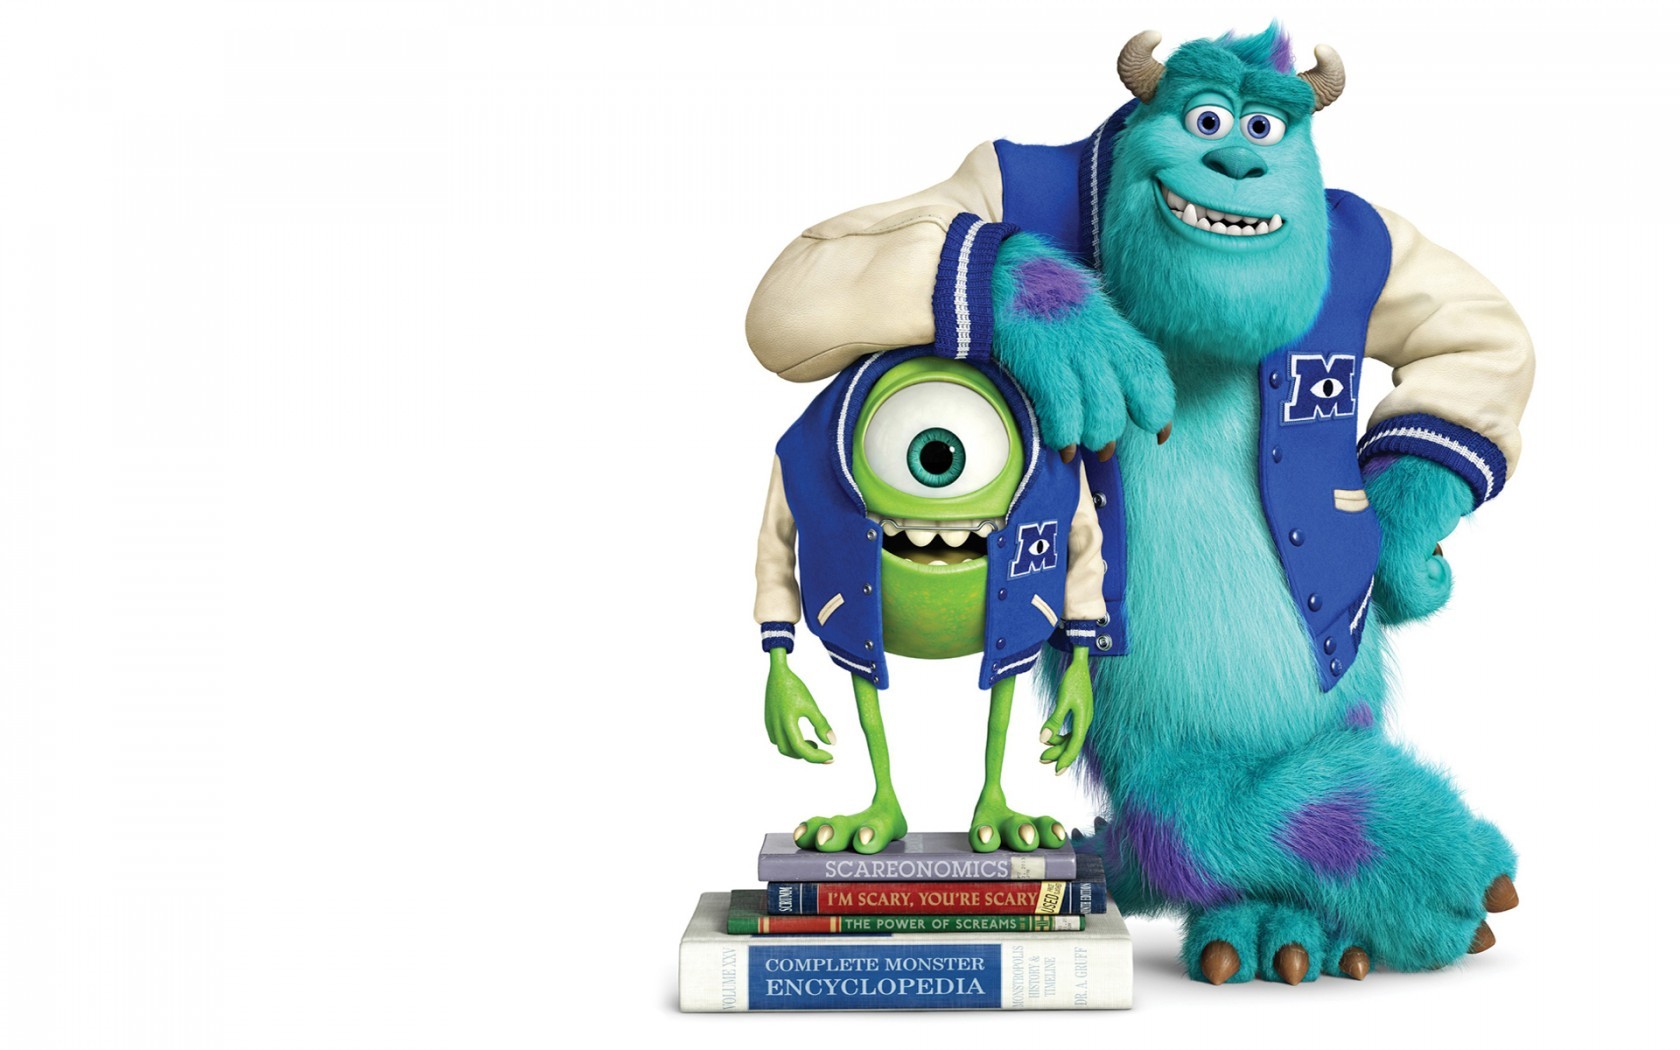 'Monsters University': When Hairy met Mikey